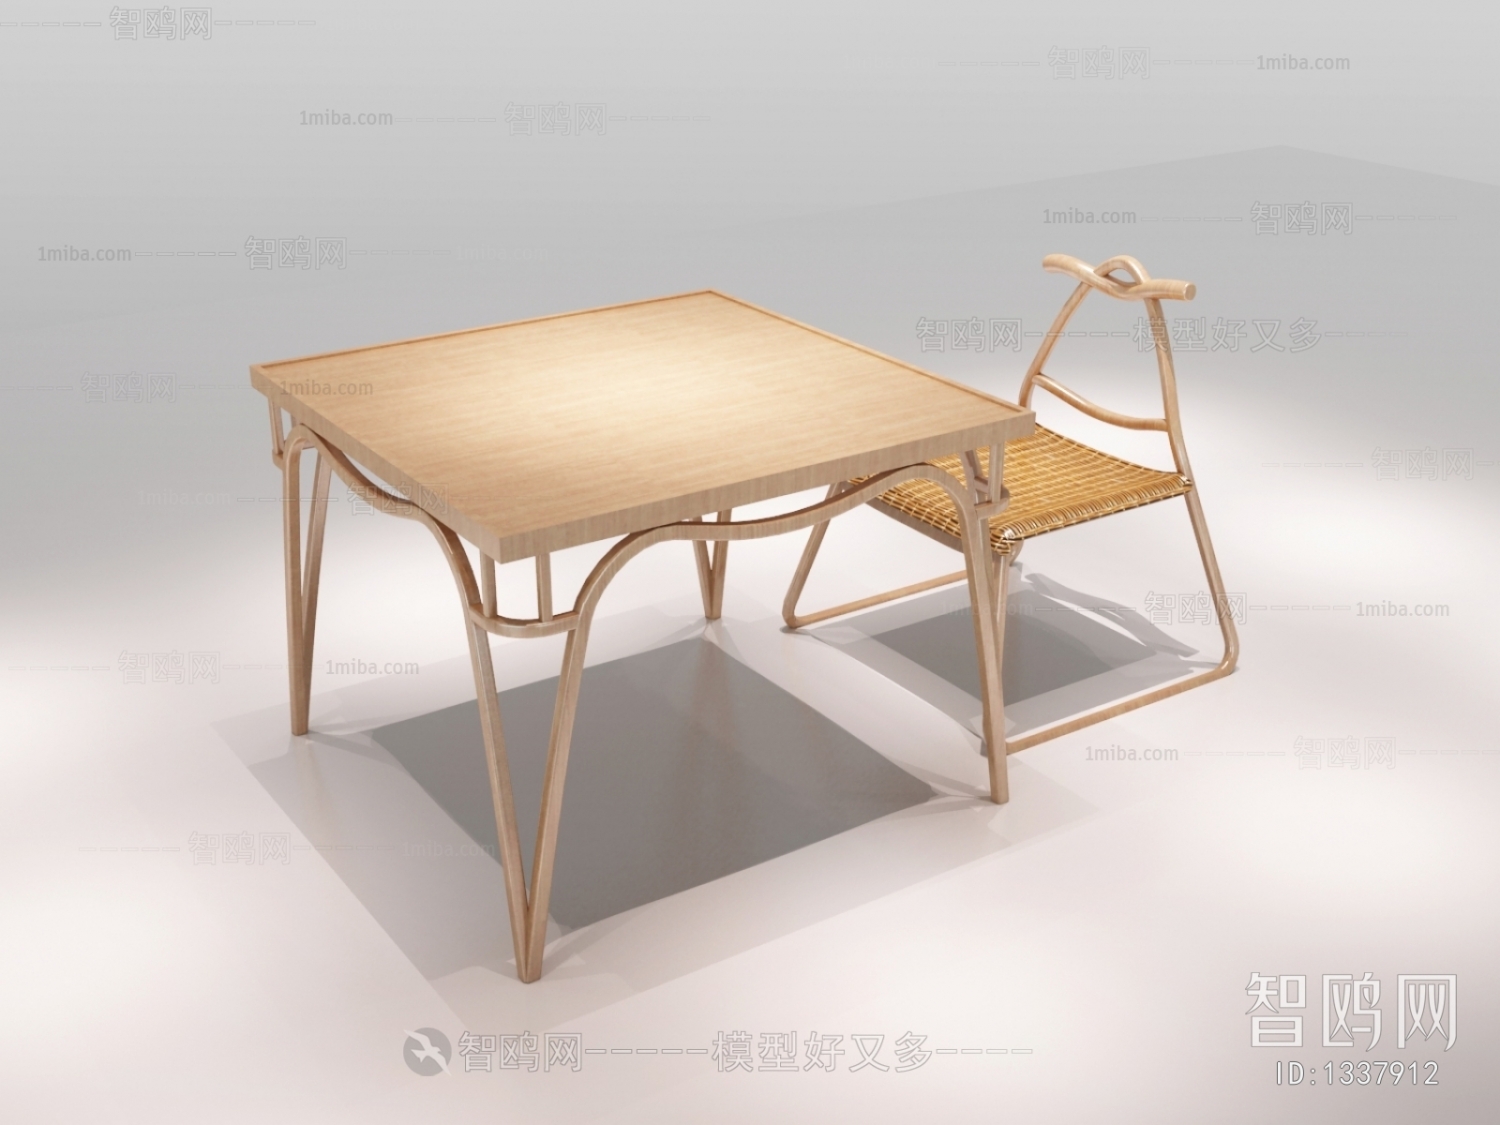 Japanese Style Leisure Table And Chair